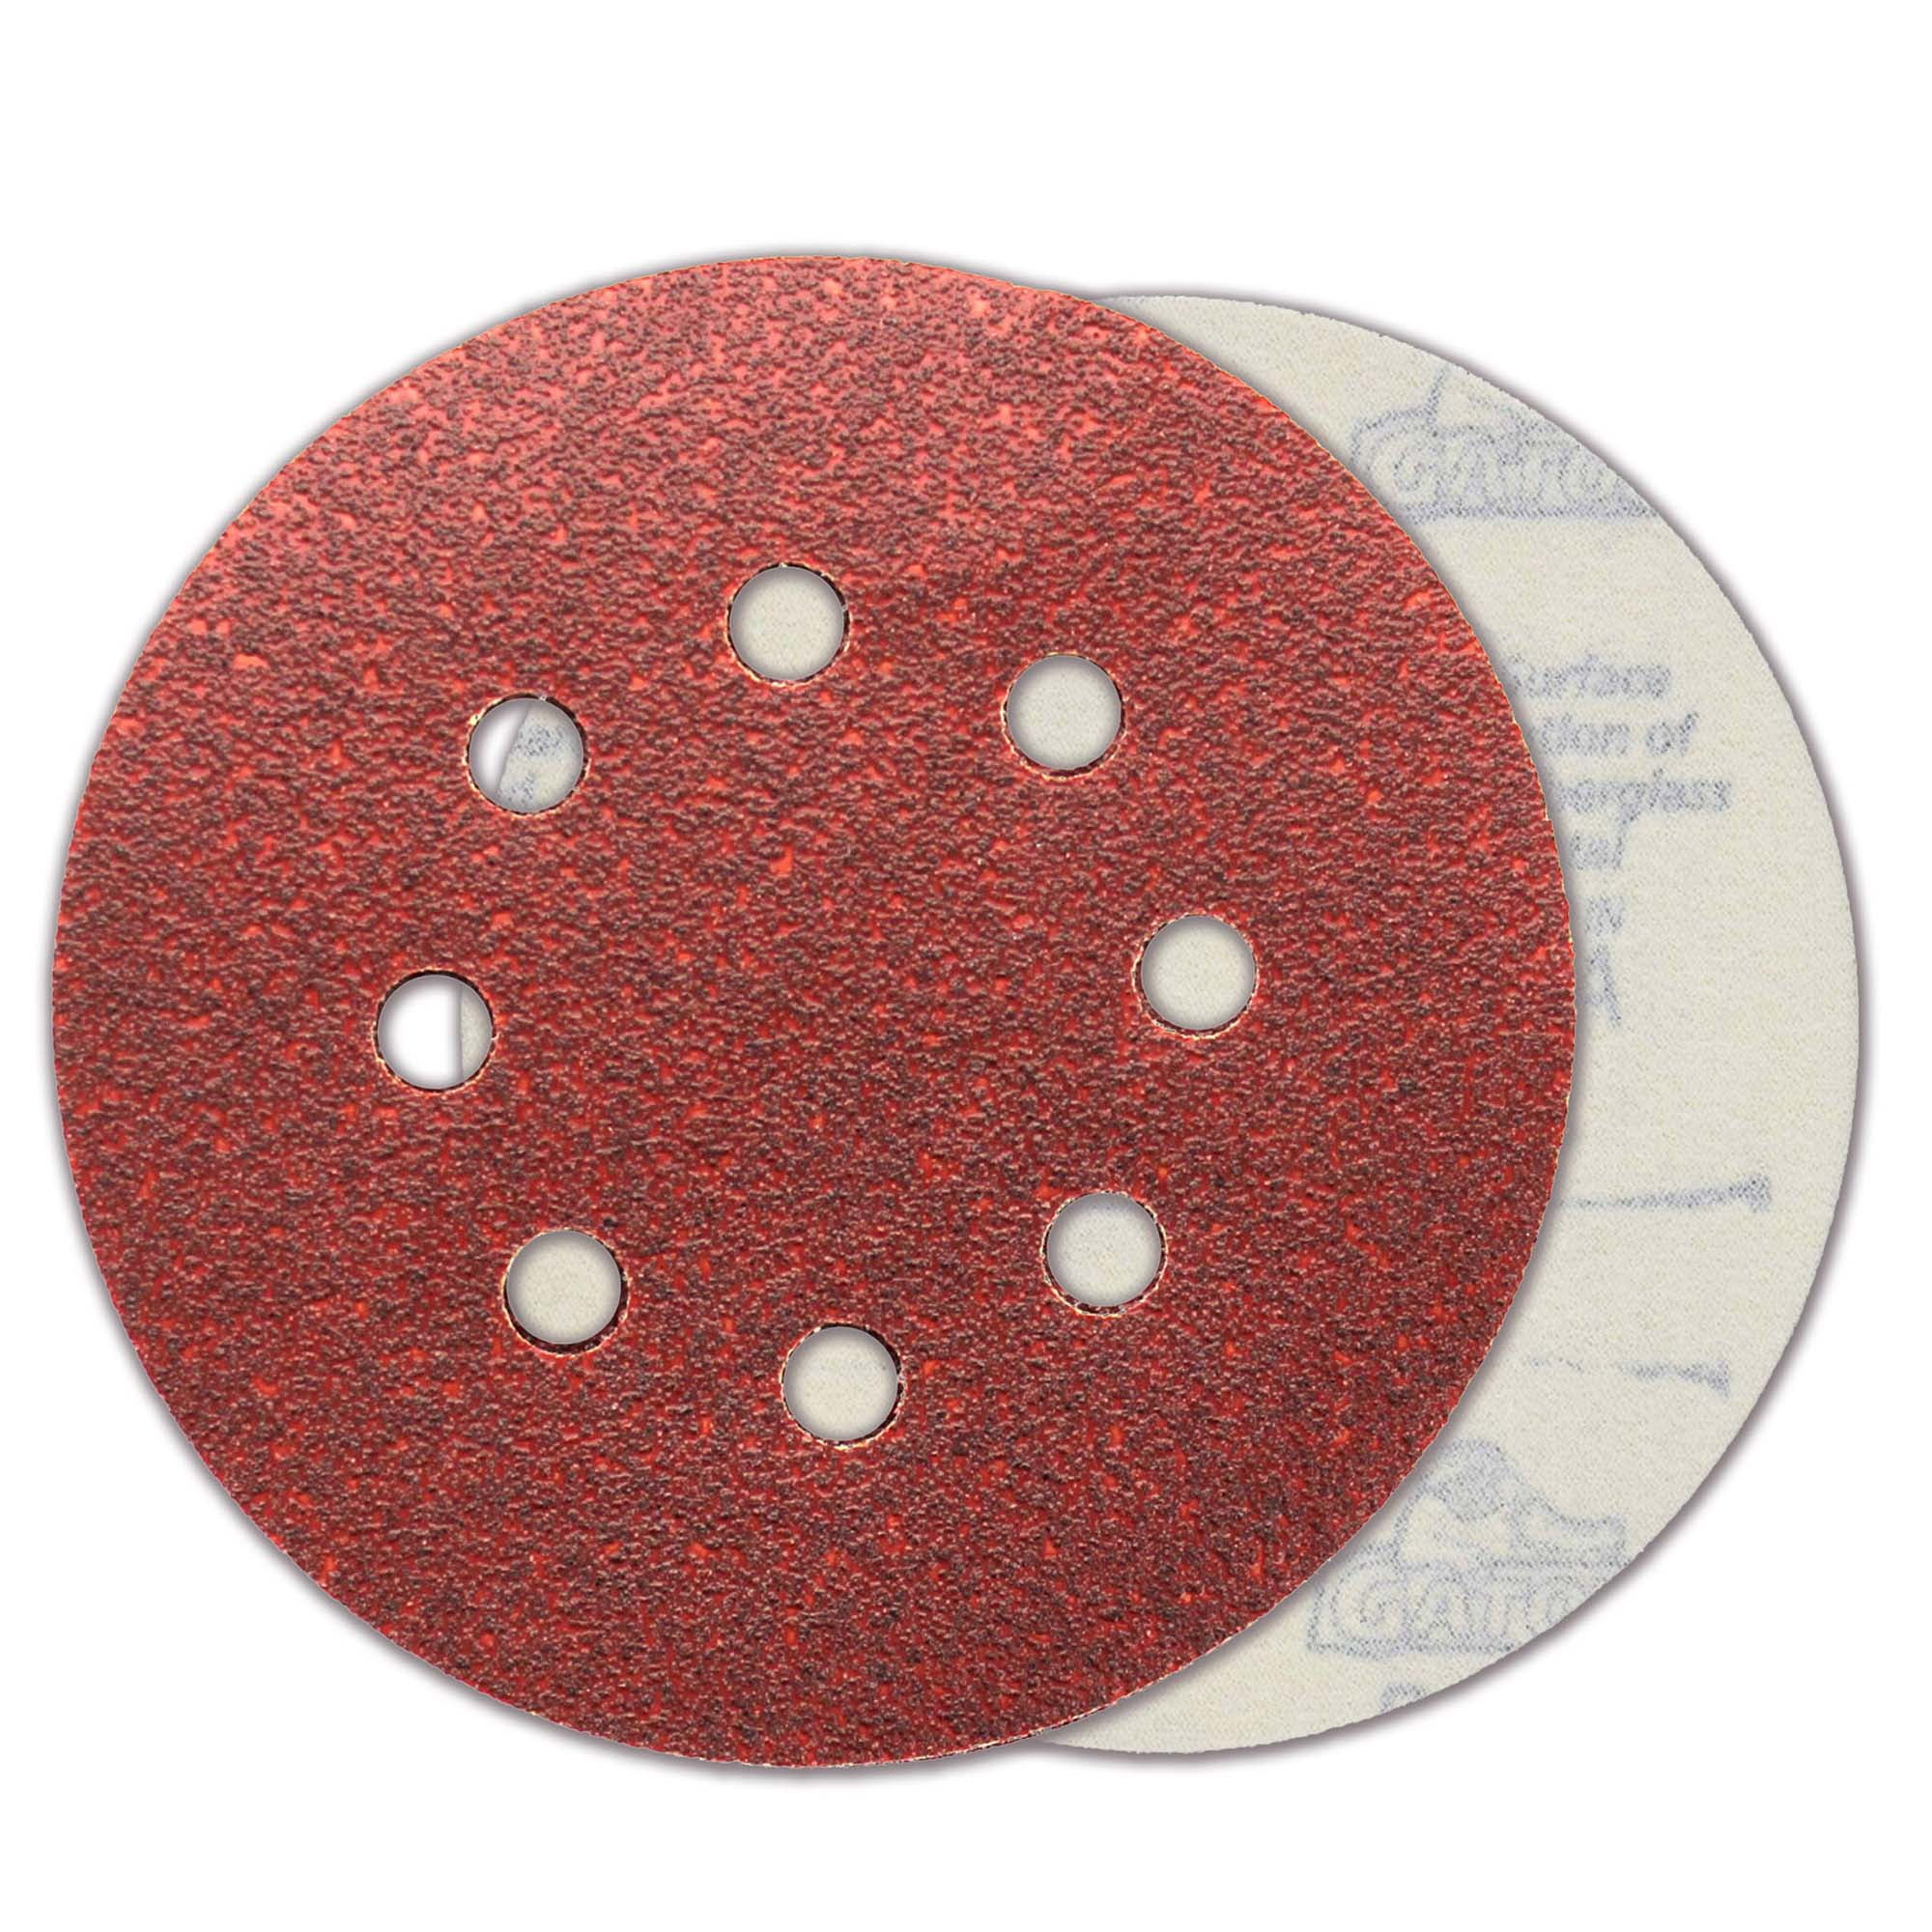 120 Grit Hook And Loop Sanding Discs Serious Grit Premium 6-Inch 17-Hole 50 